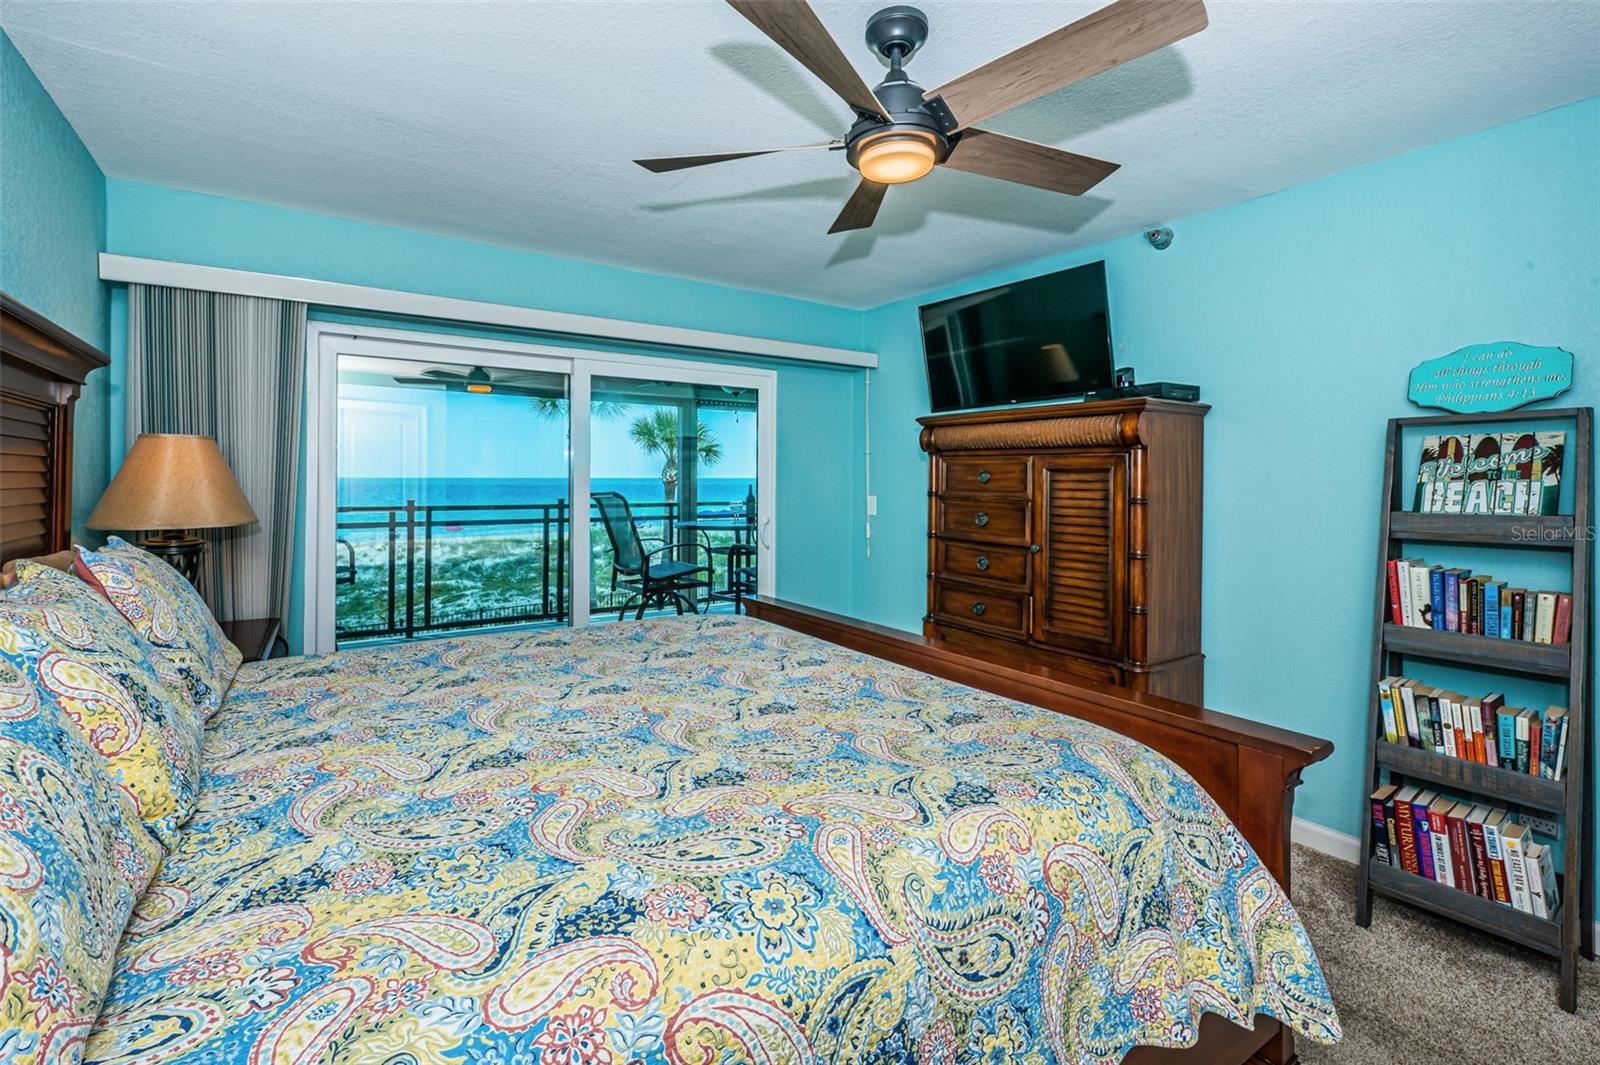 .12.1 x 16.1  Master Bedroom Suite Looking Towards Balcony ... It's Your Turn to Enjoy Life.. This is What we Call a Destination Investment. Come Enjoy Your hard Earned Savings. Perfect 1031 Tax Exchange Property.. Call For Details..